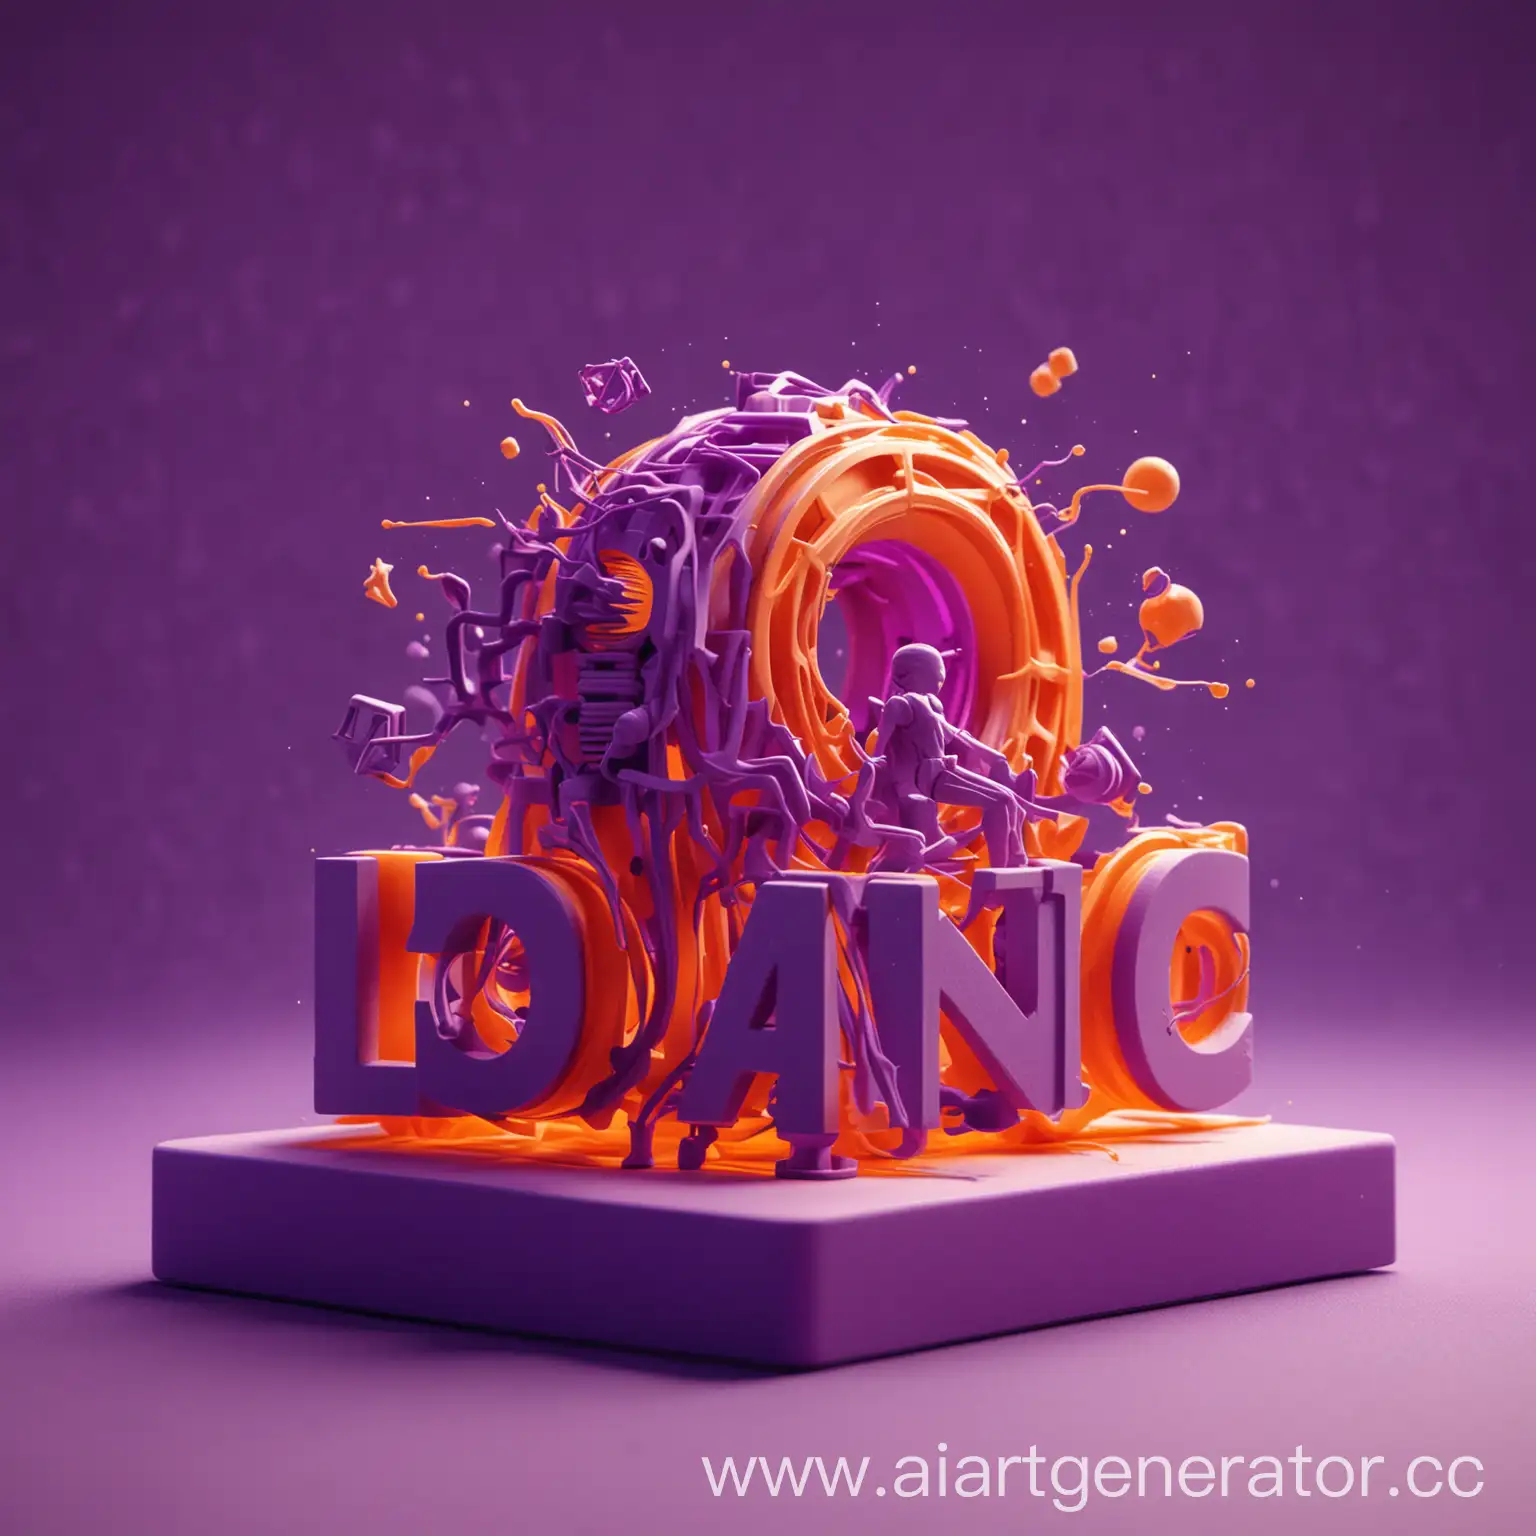 Dynamic-3D-Printing-Figures-Channel-Poster-Multilayered-Movement-in-Purple-and-Orange-with-ASMR-Sound